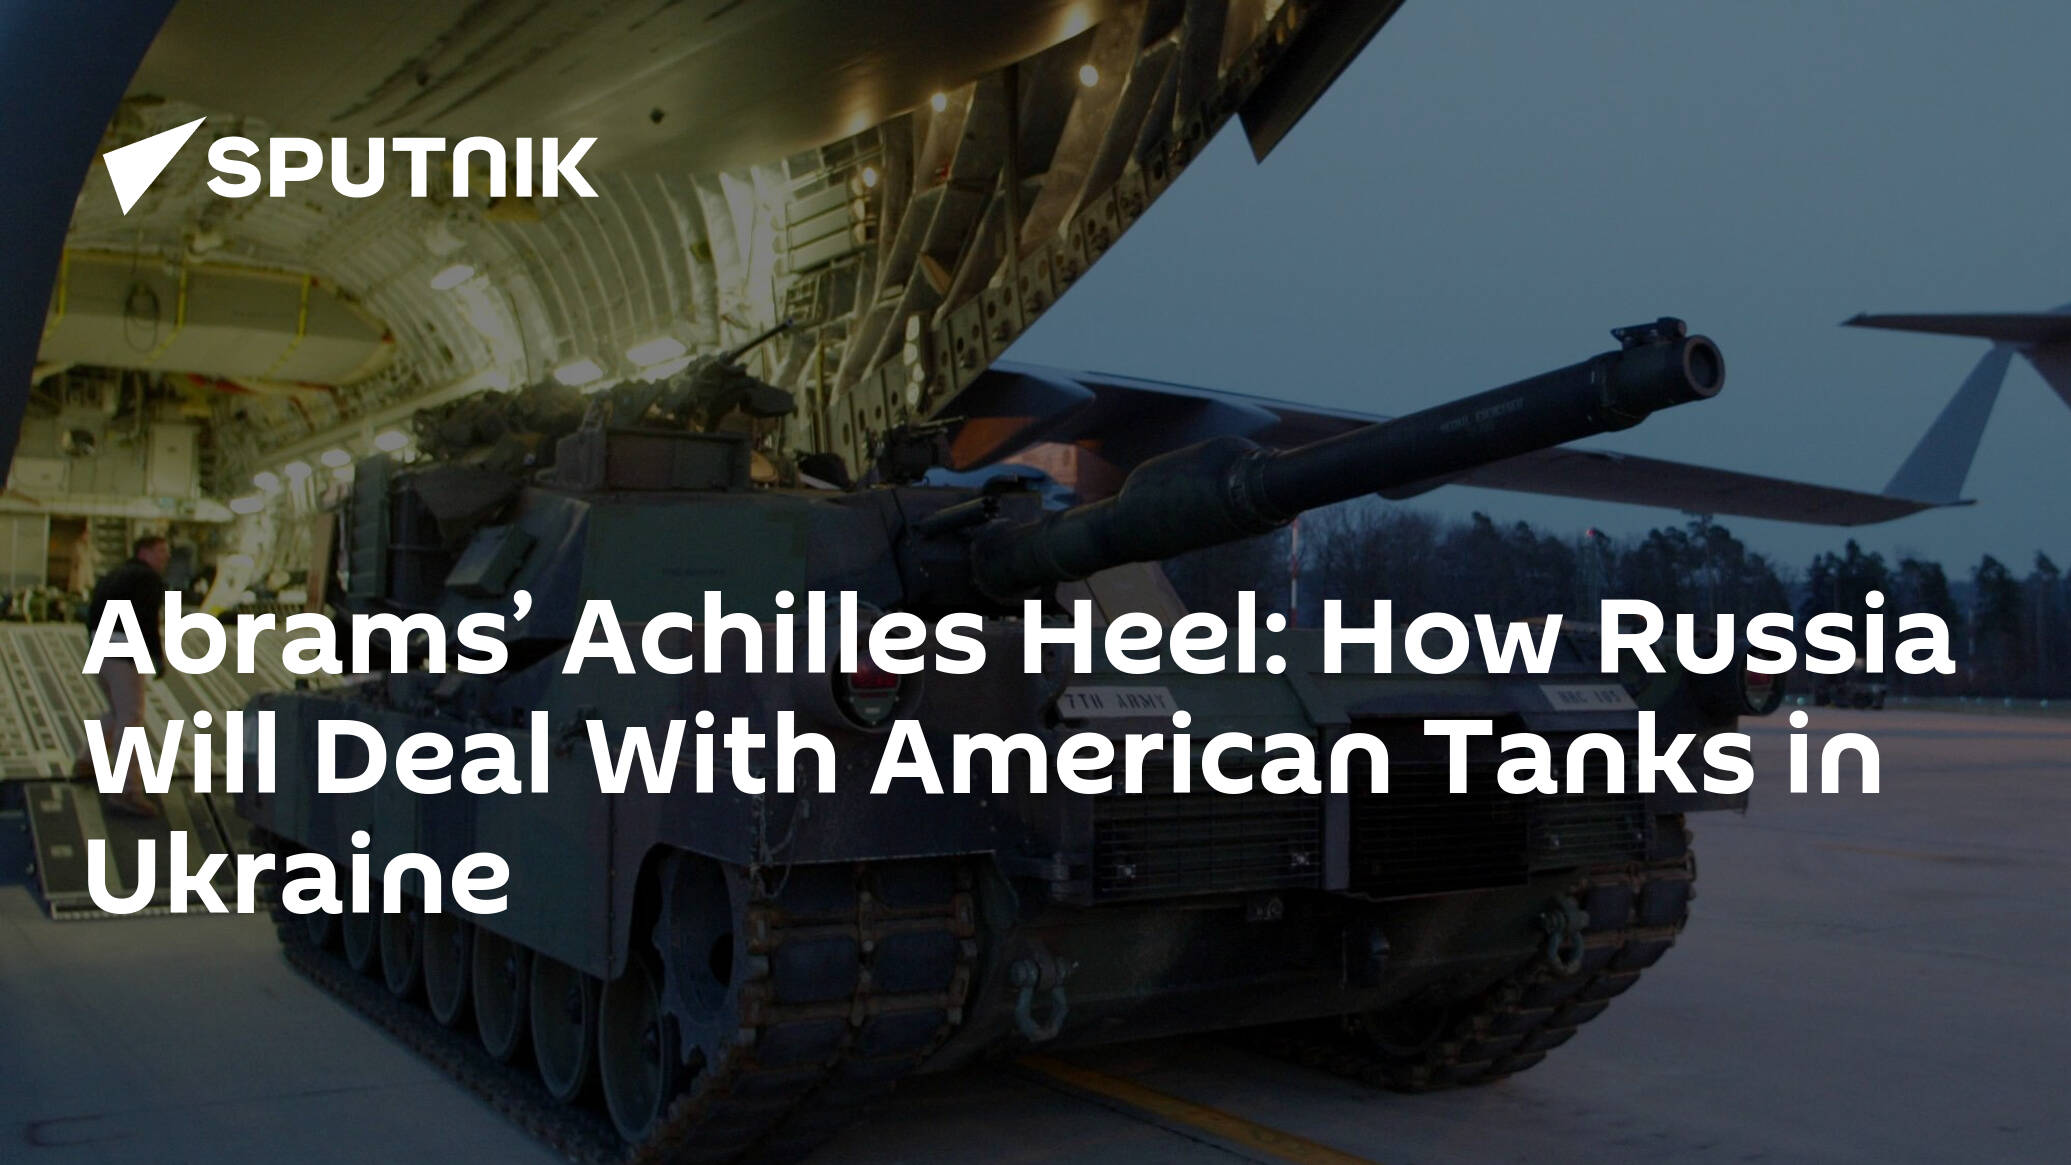 Abrams’ Achilles Heel: How Russia Will Deal With American Tanks in Ukraine